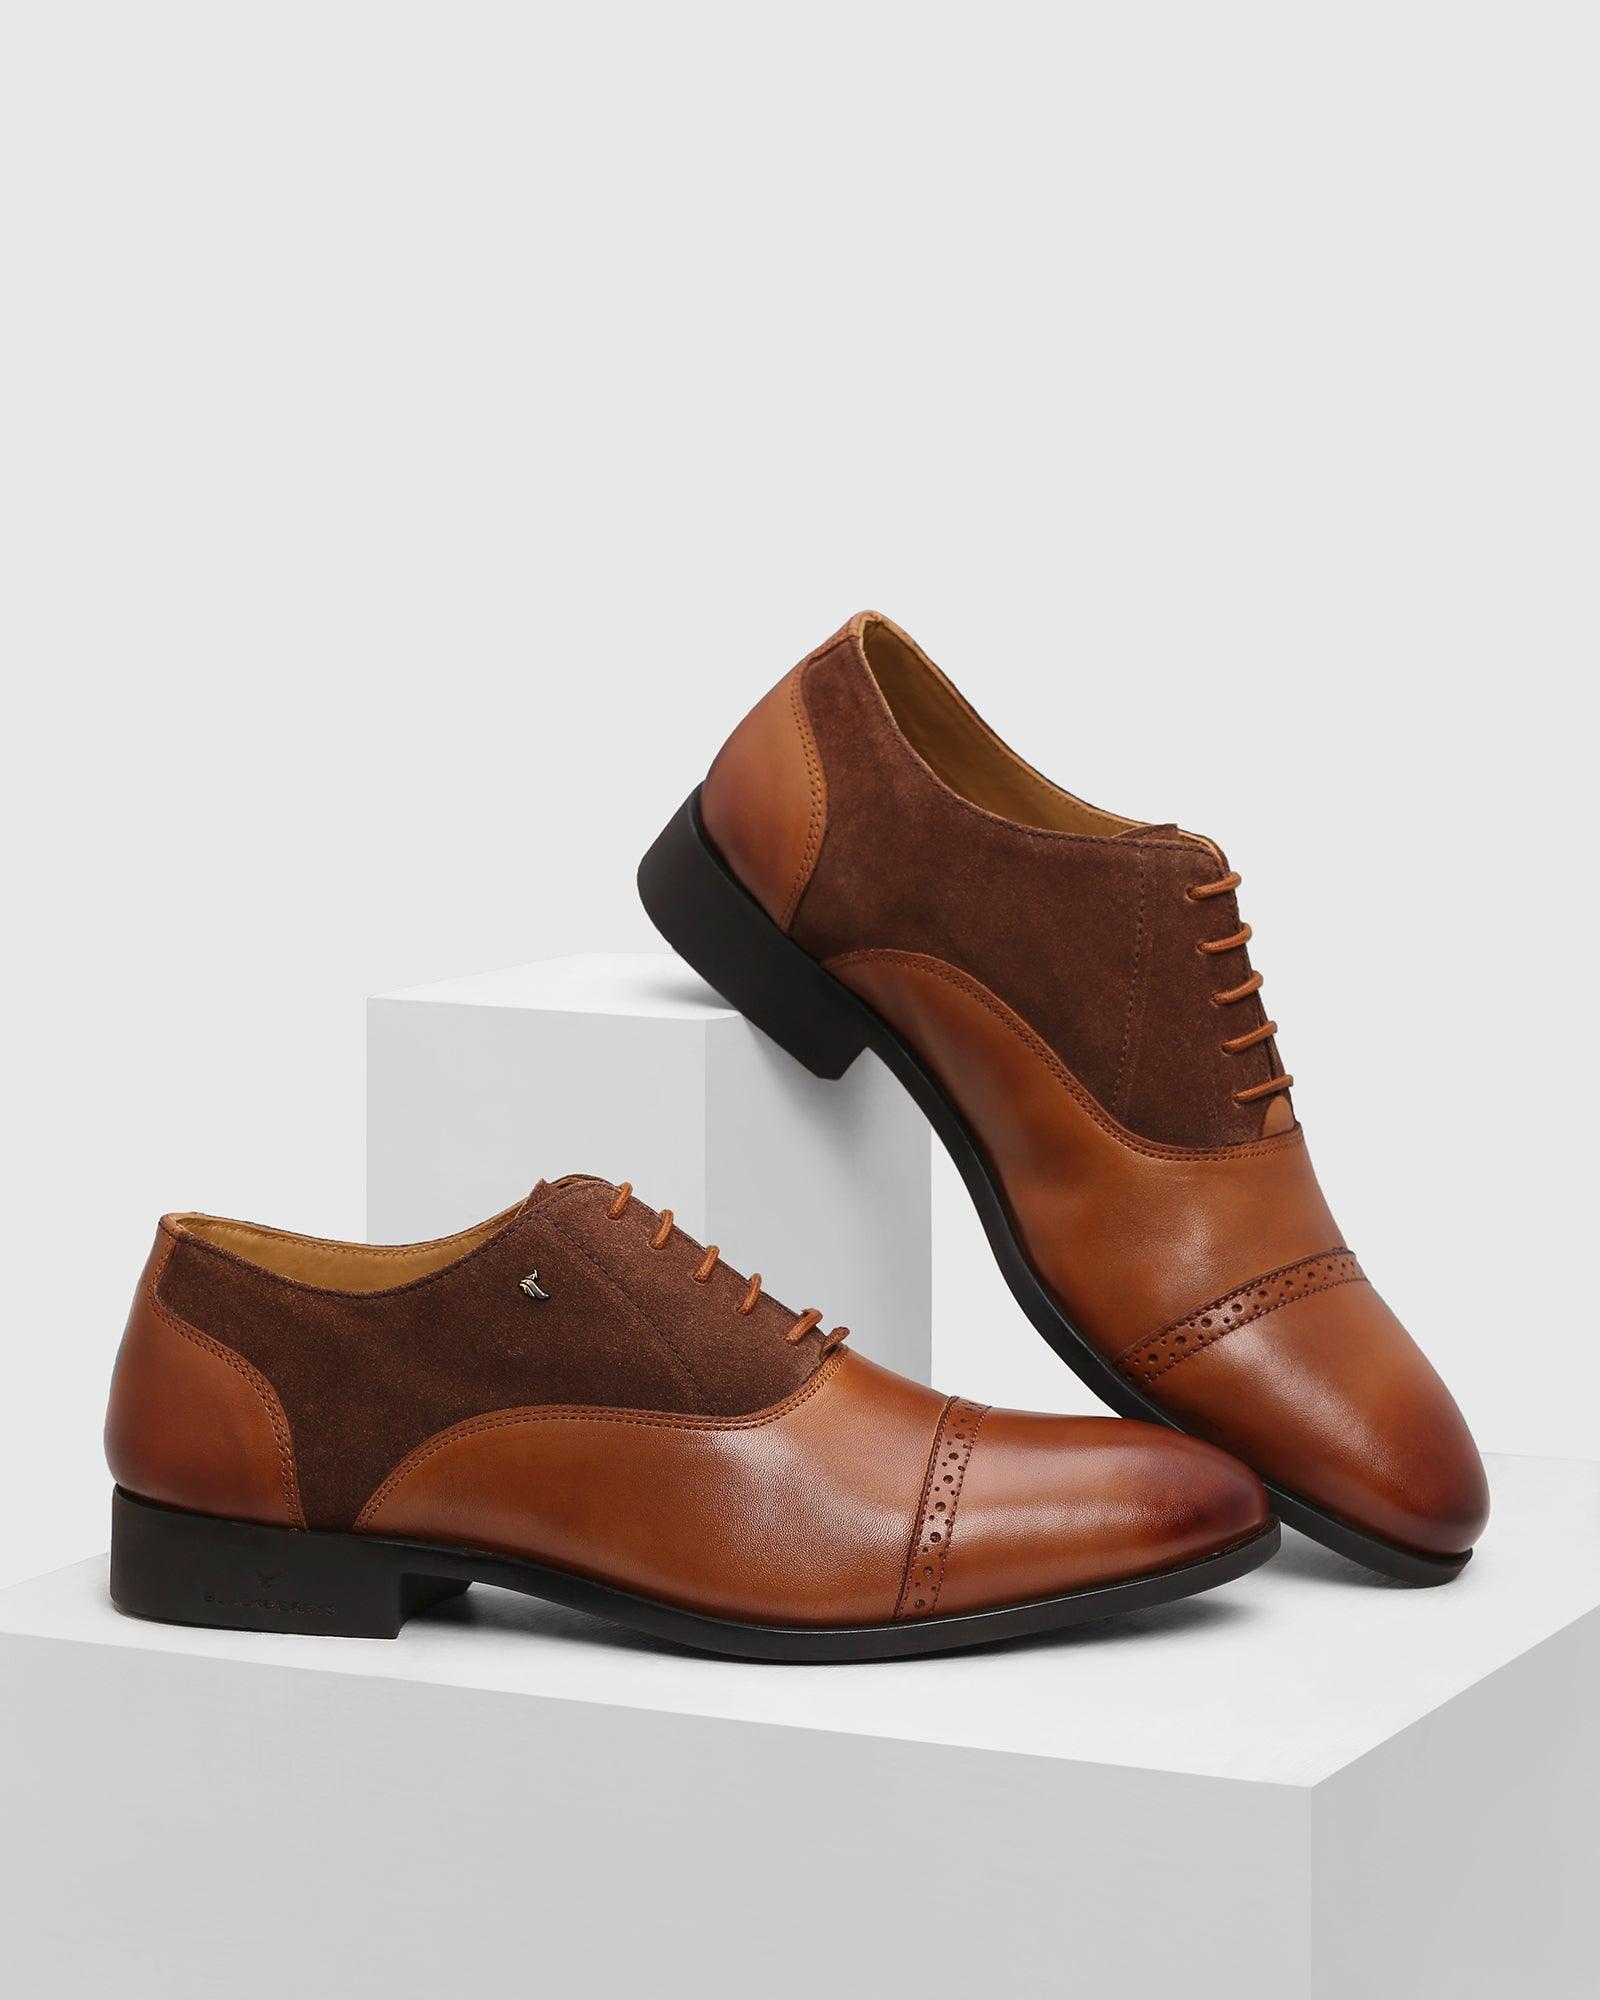 leather-formal-tan-solid-oxford-shoes---pager